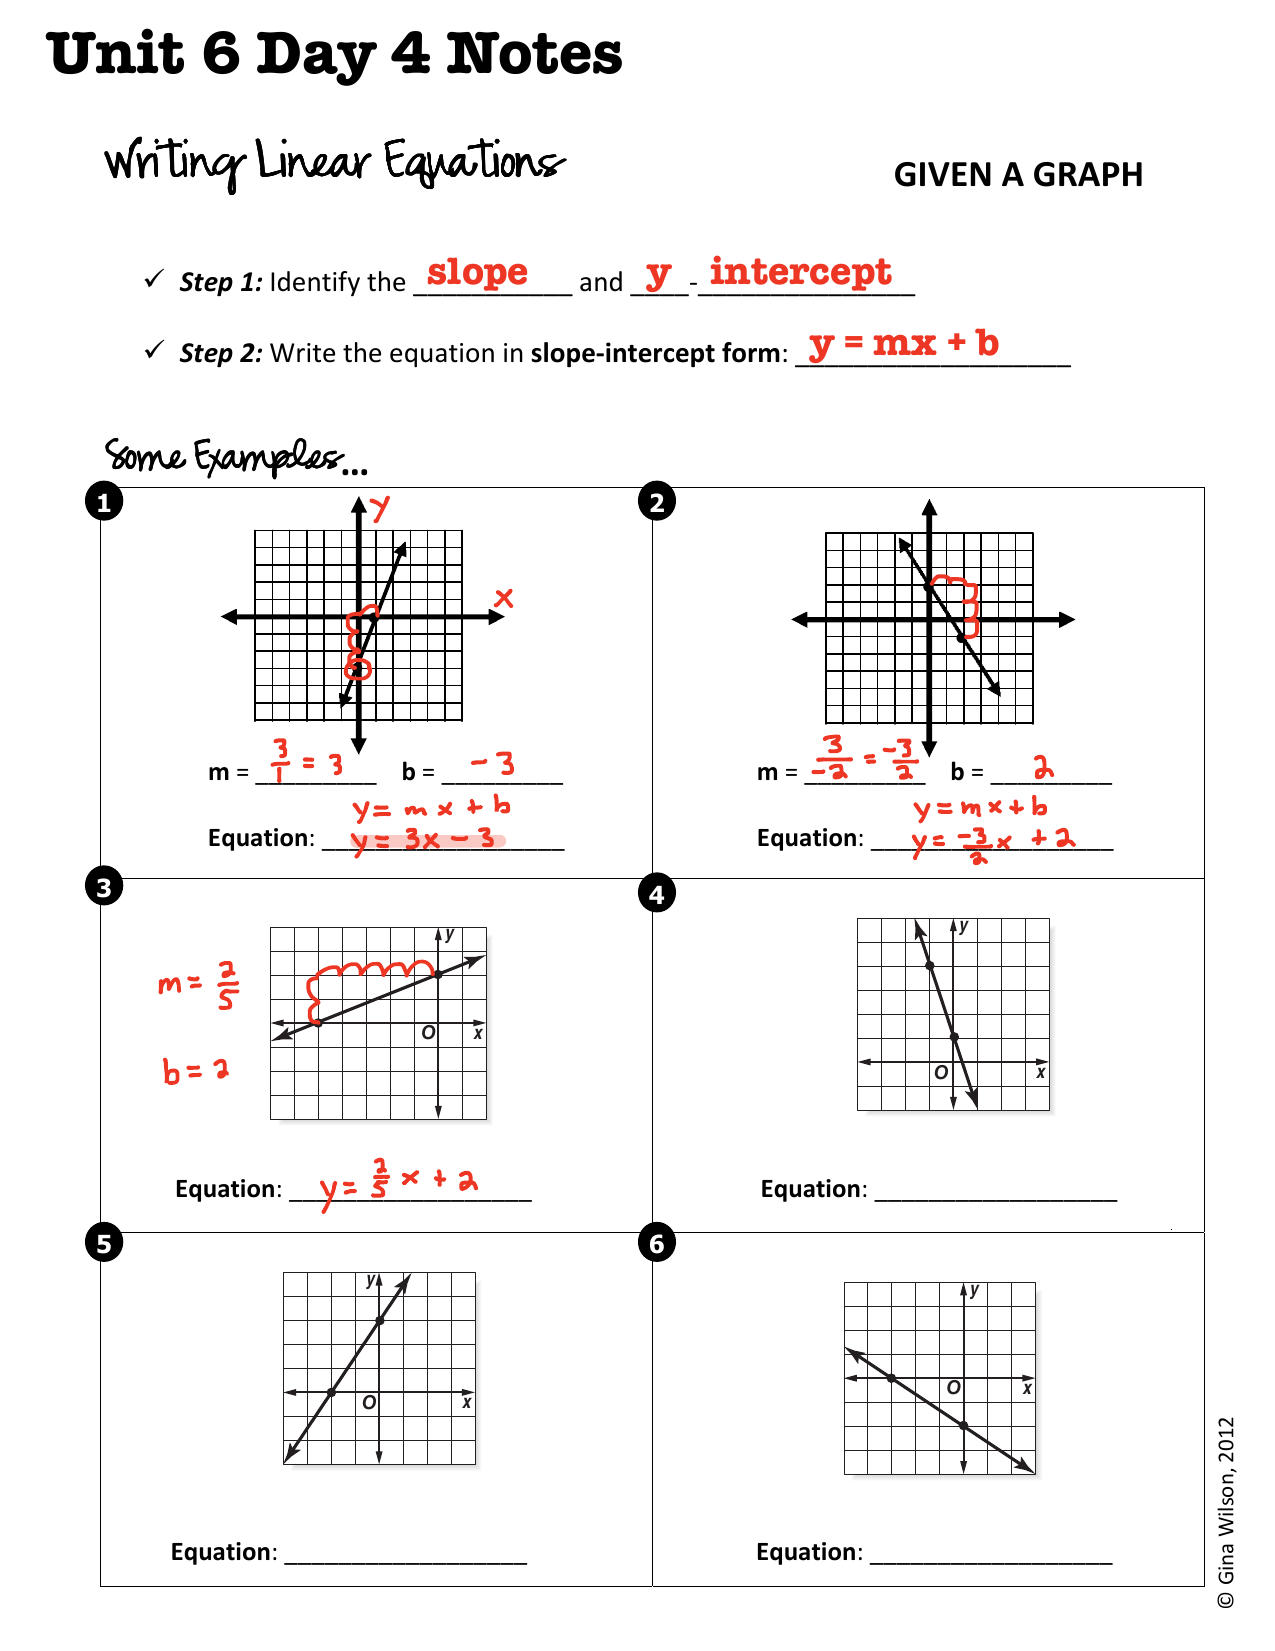 Writing Linear Equations With Linear Equations Worksheet With Answers